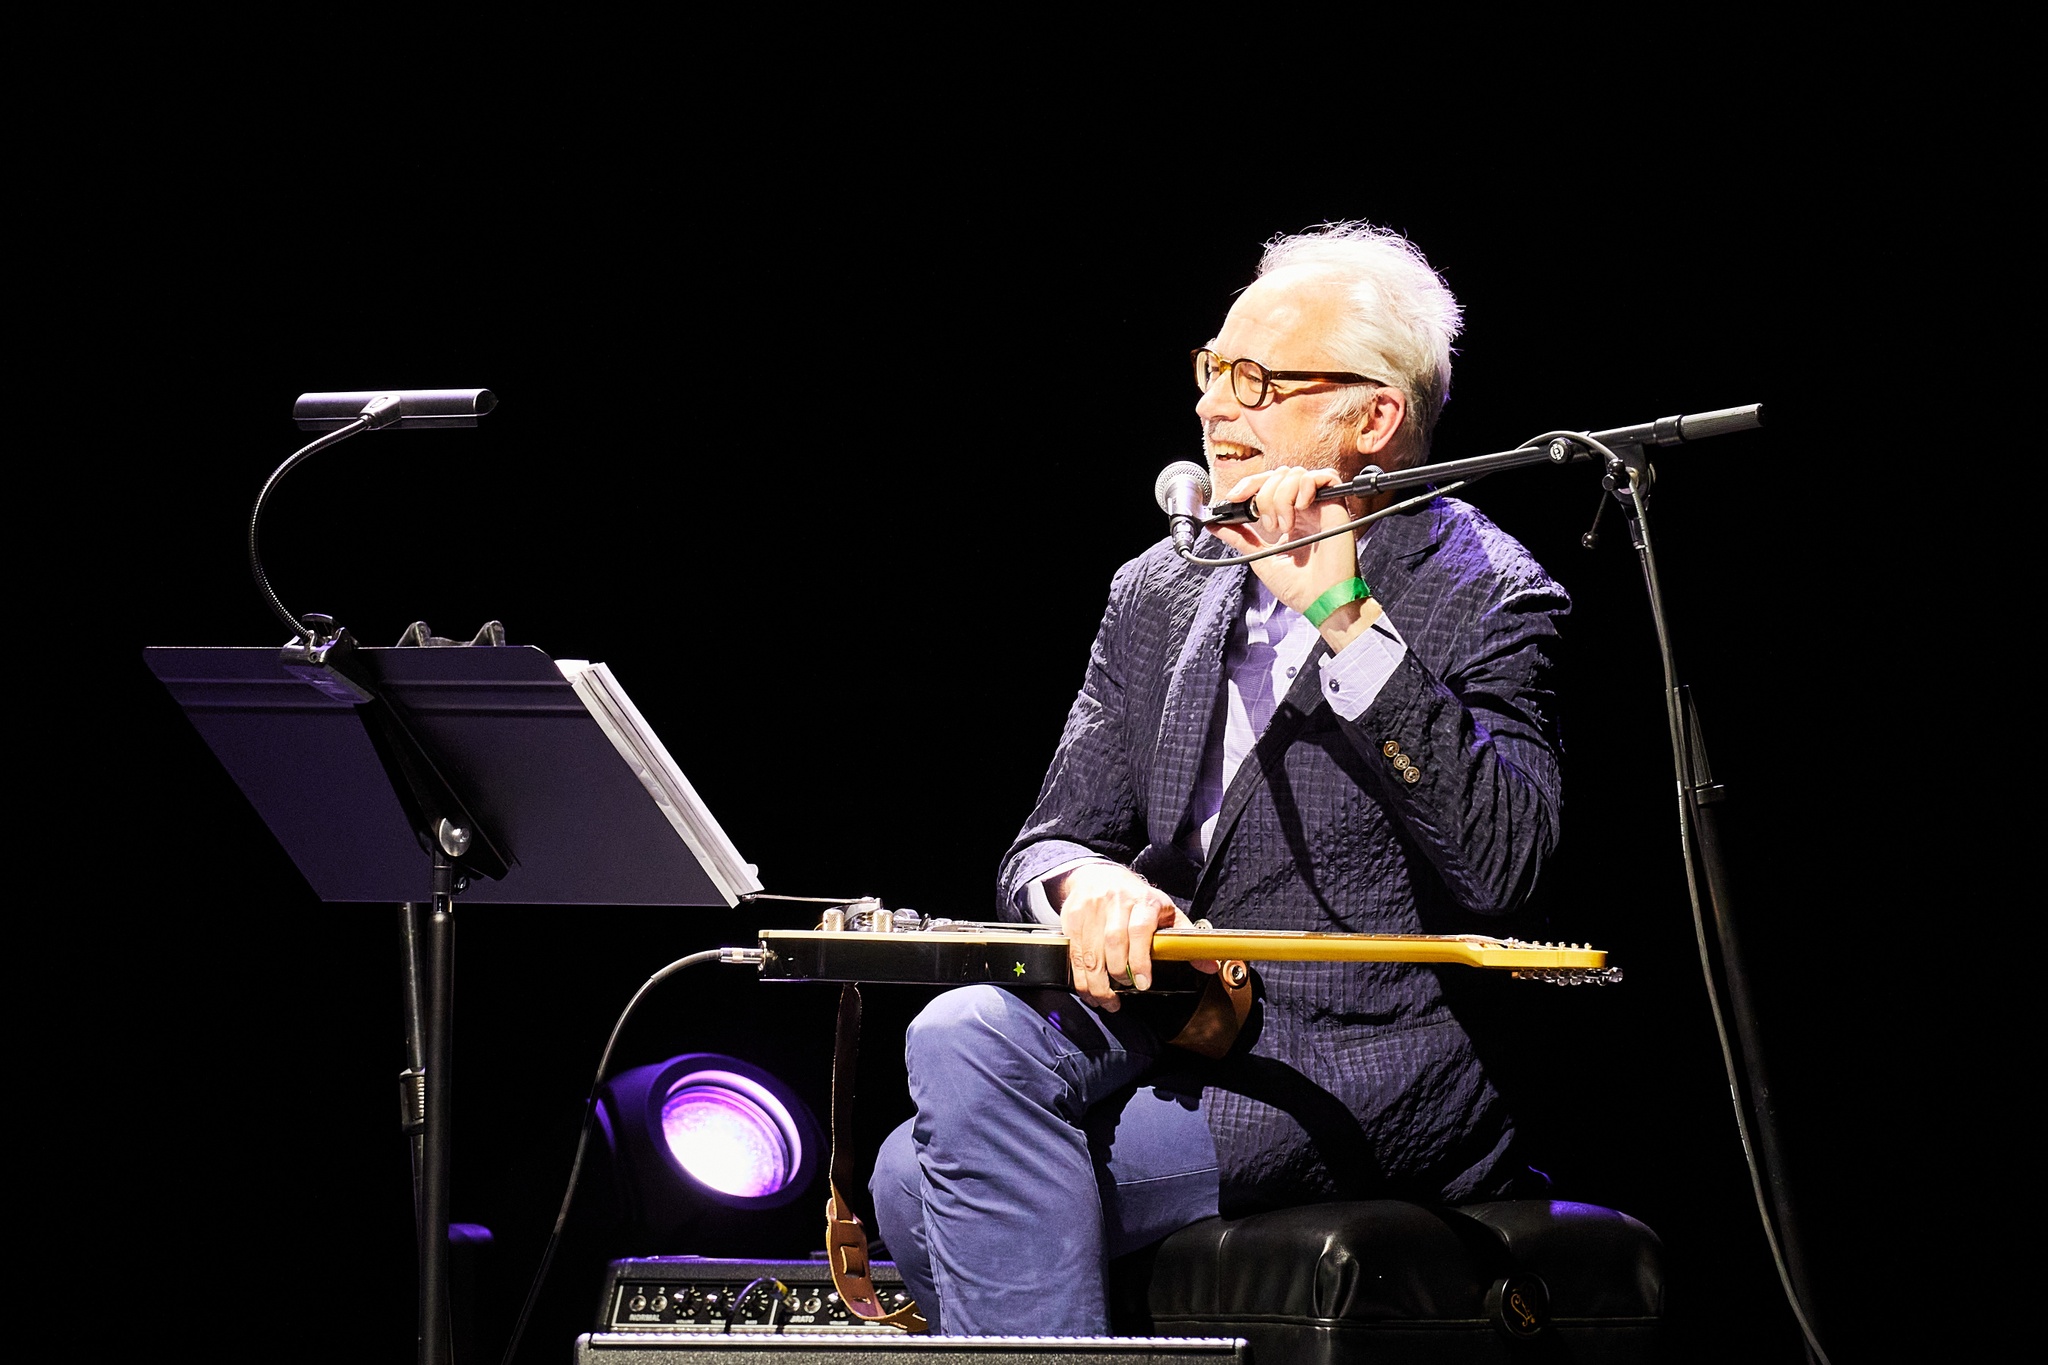 A guitarist seated on stage speaking into a microphone that he steadies in front of his face. He is a white man with white hair, wearing glasses and a blue blazer.